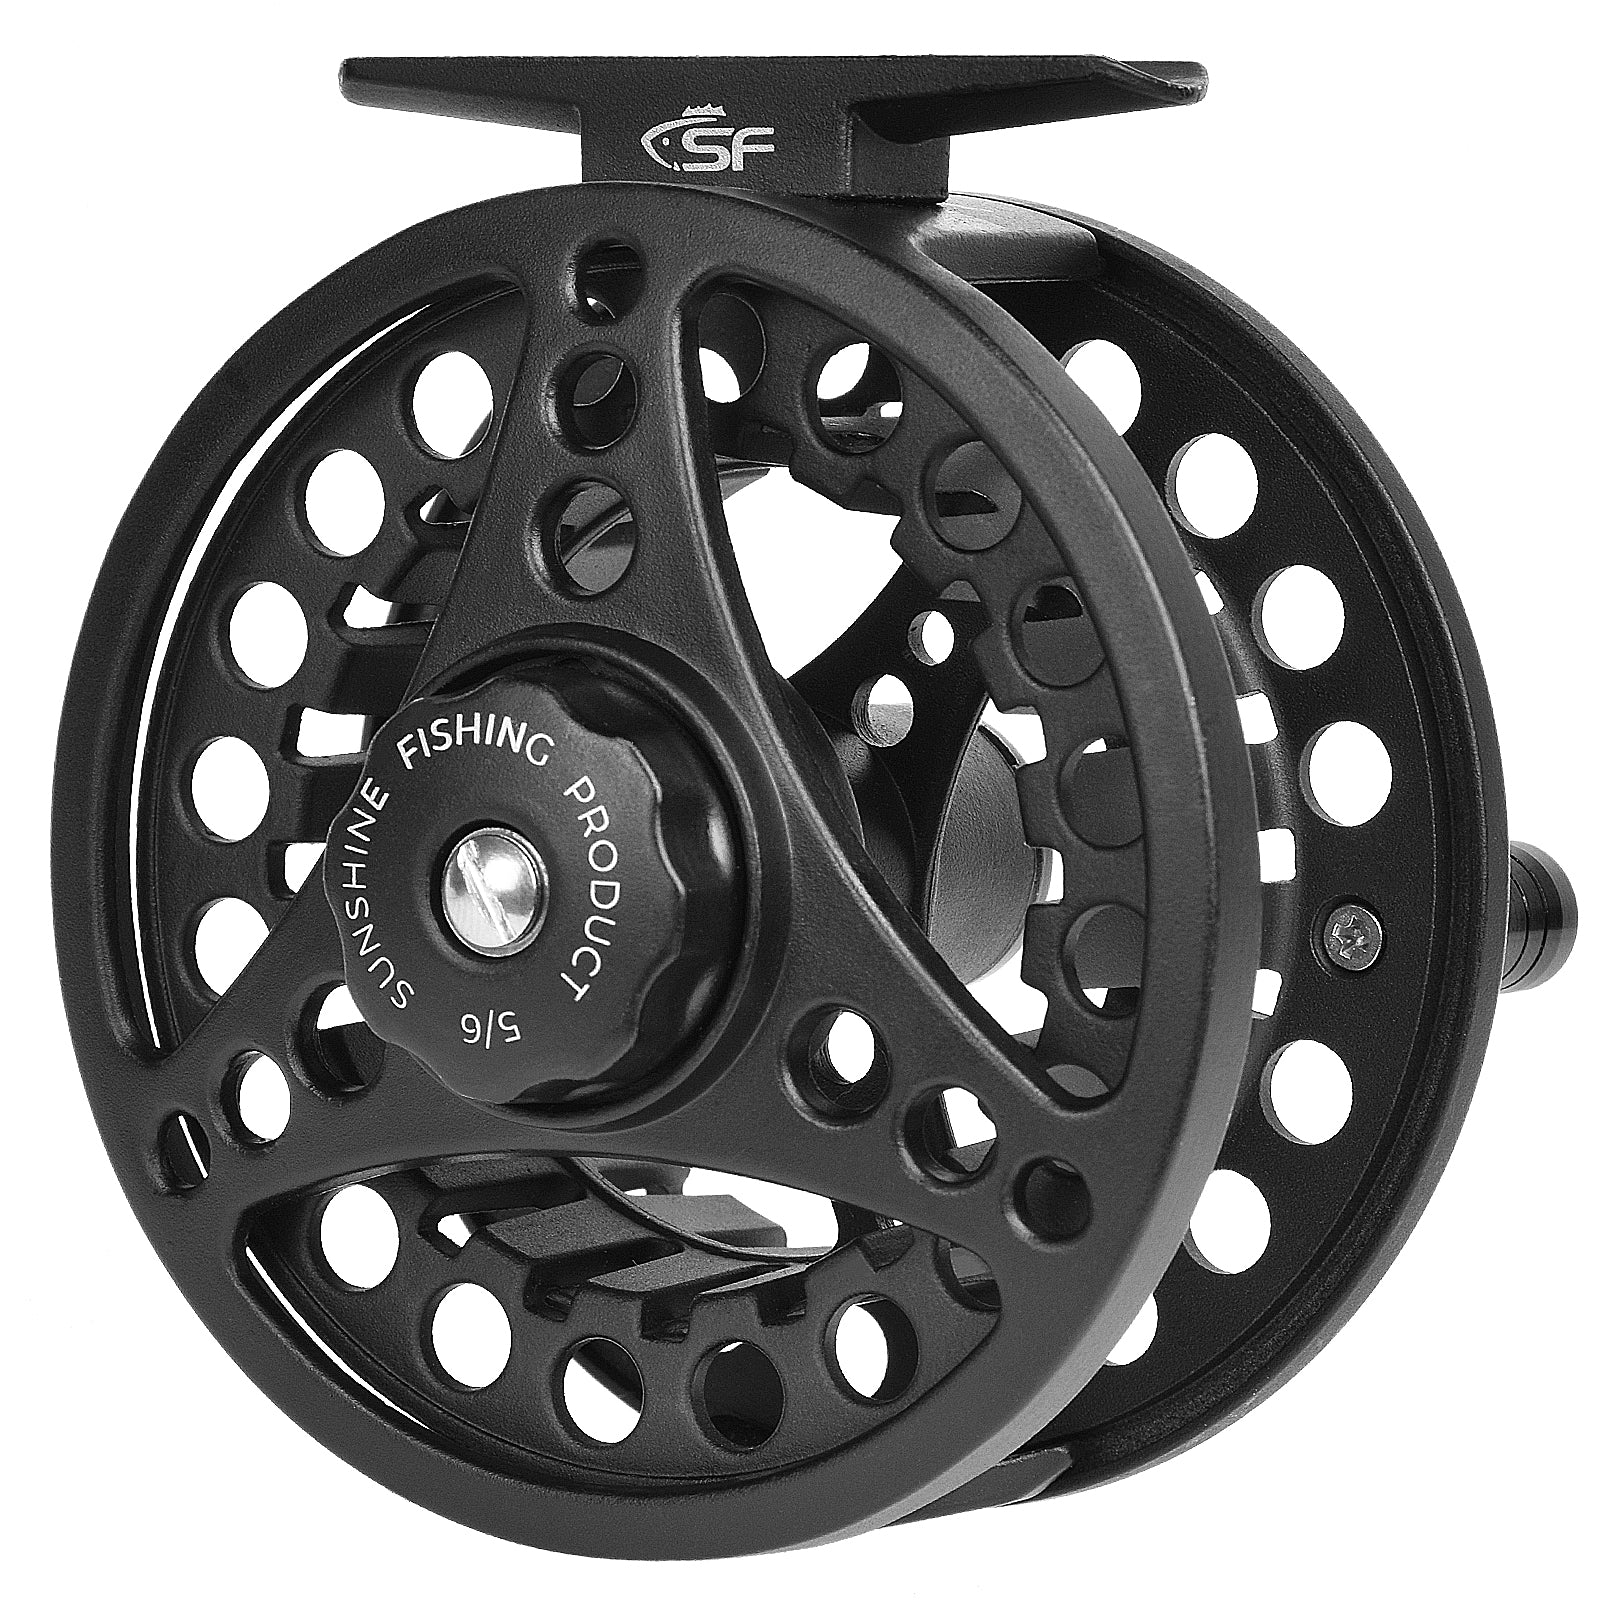 SF Large Arbor Fly Fishing Reel with Aluminum Alloy Body 3/4wt 5